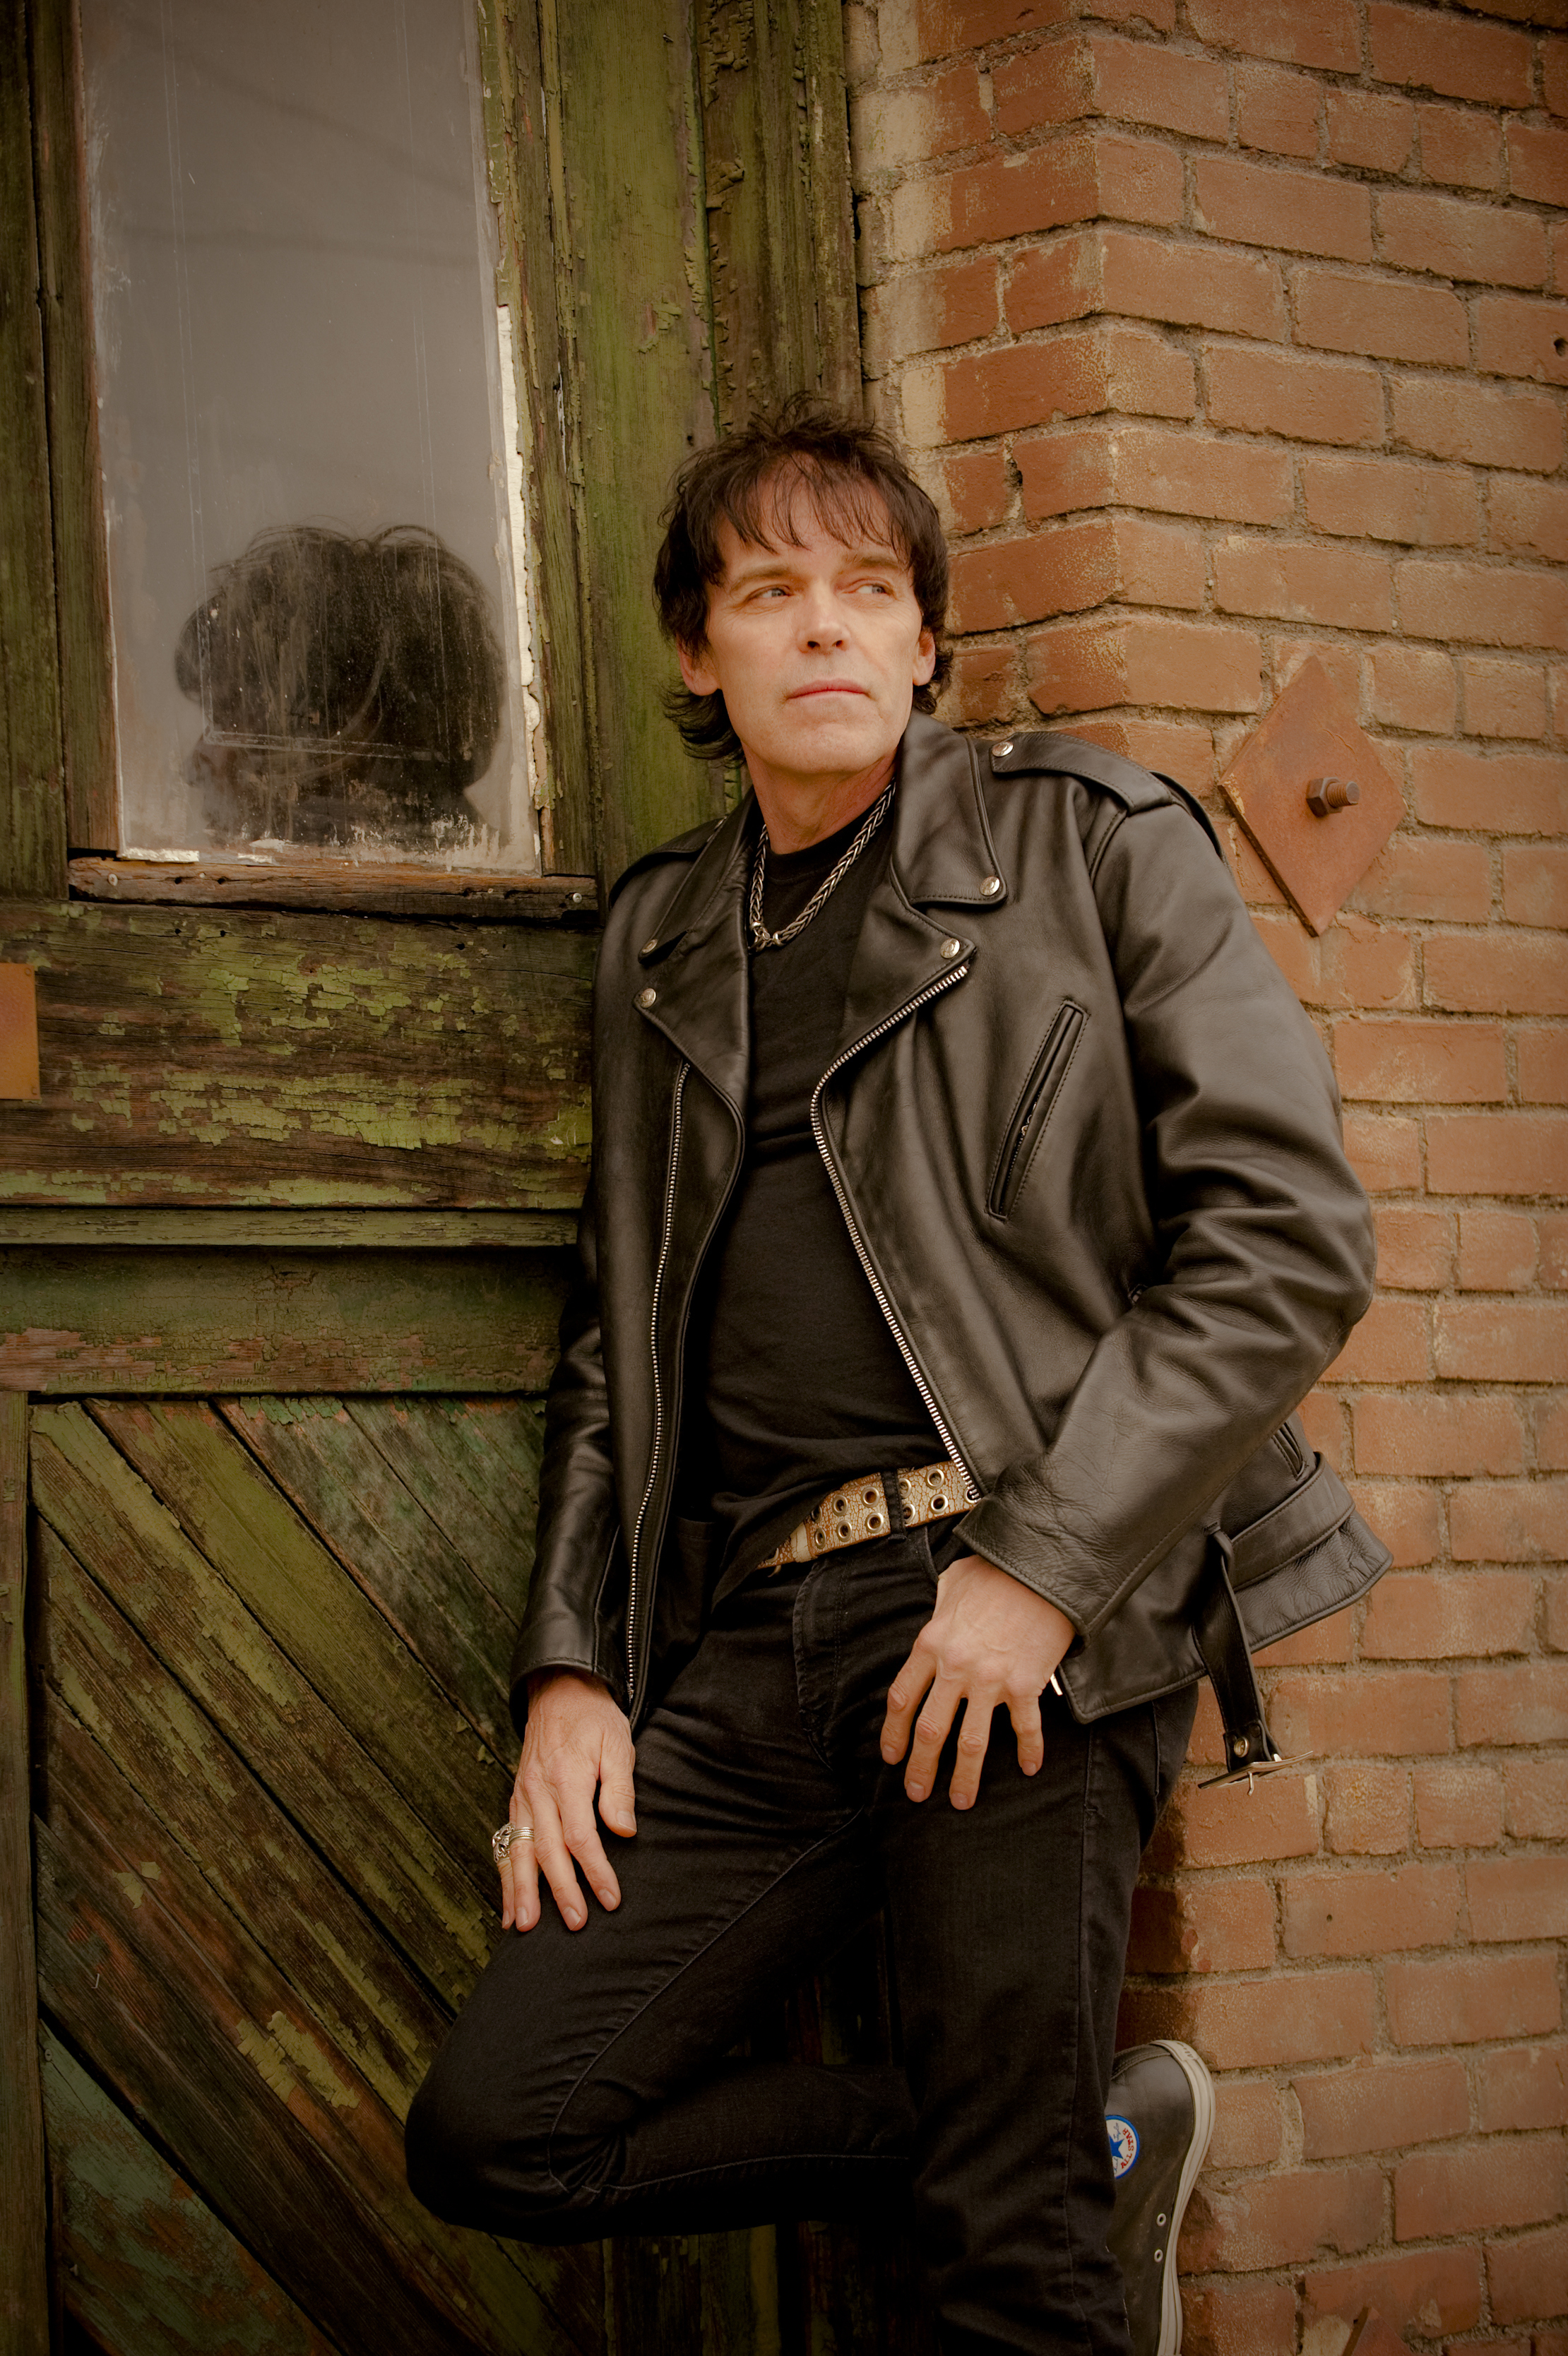 Richie Ramone poses during a CD cover session on March 5, 2013, in Los Angeles, California. | Source: Getty Images